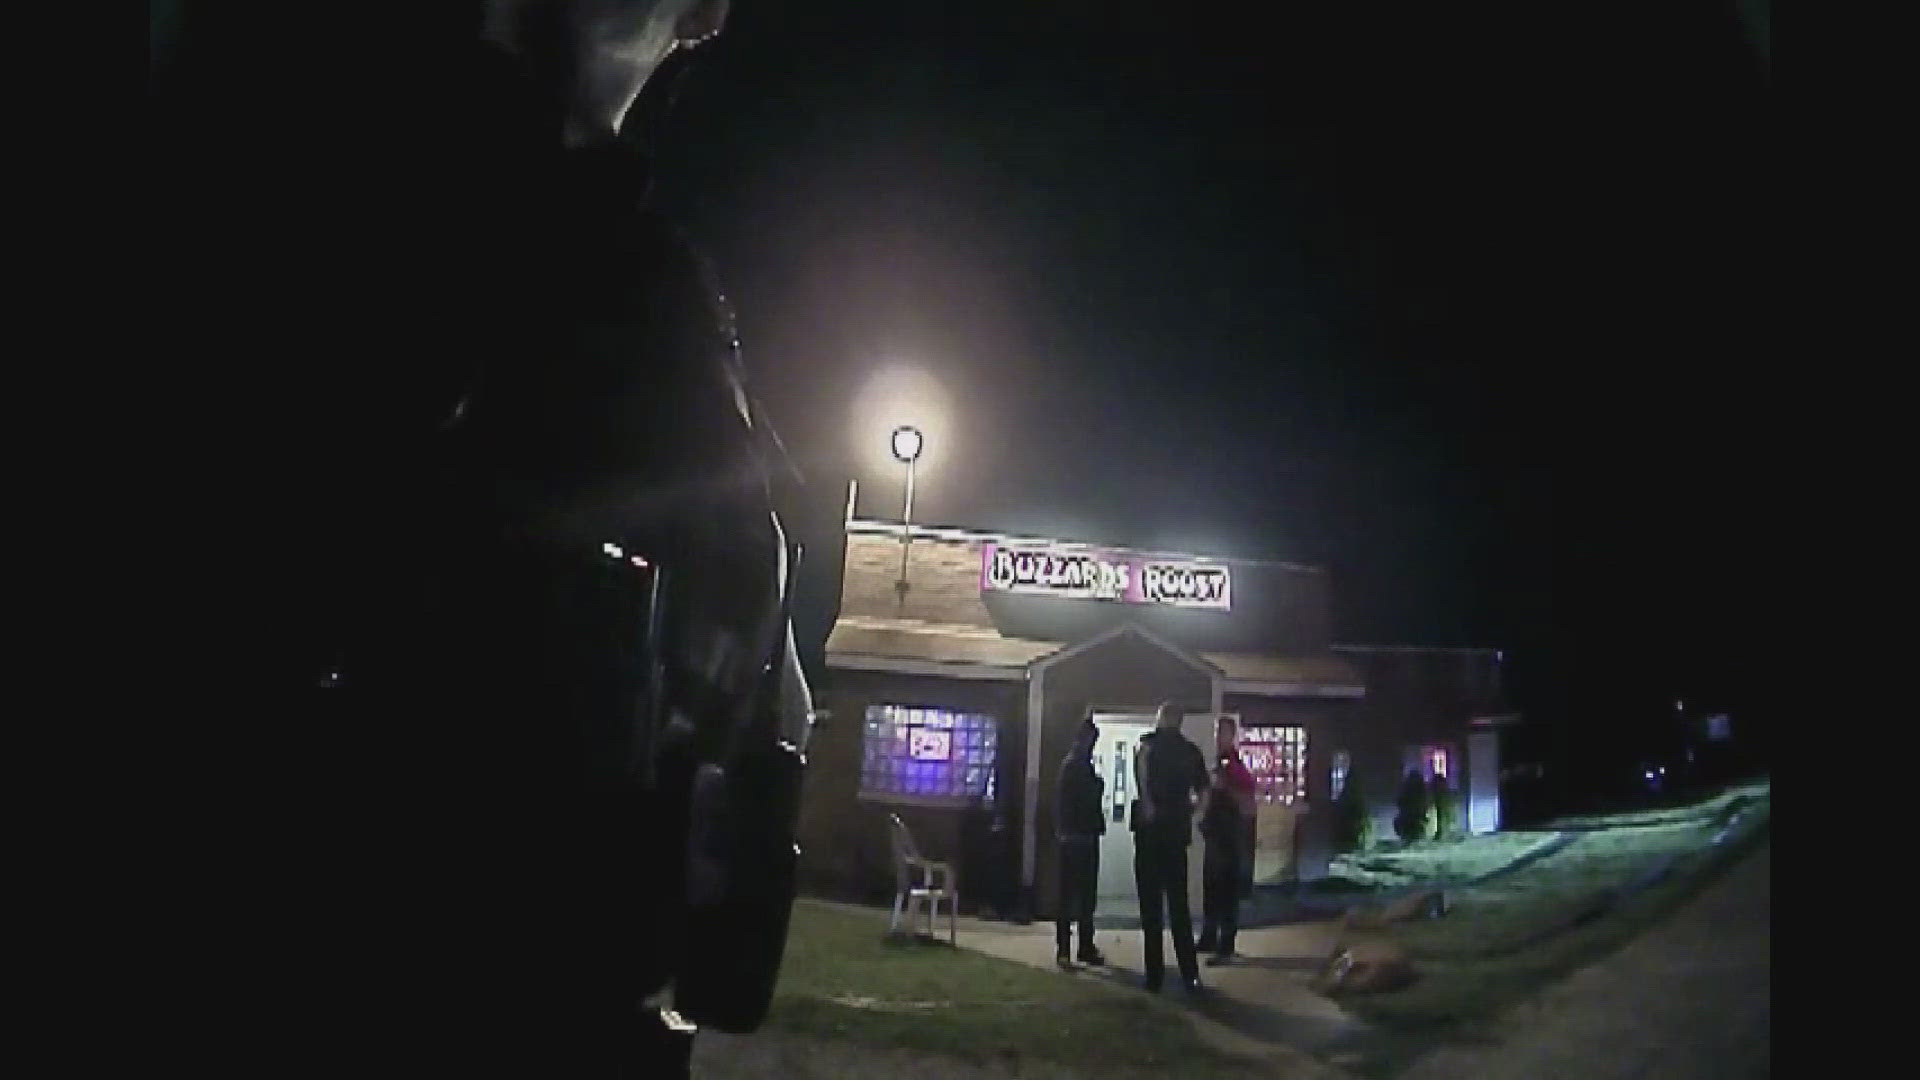 3News Investigates has learned that two deputized federal agents are under investigation after being accused of illegally detaining a man at a Medina County bar.